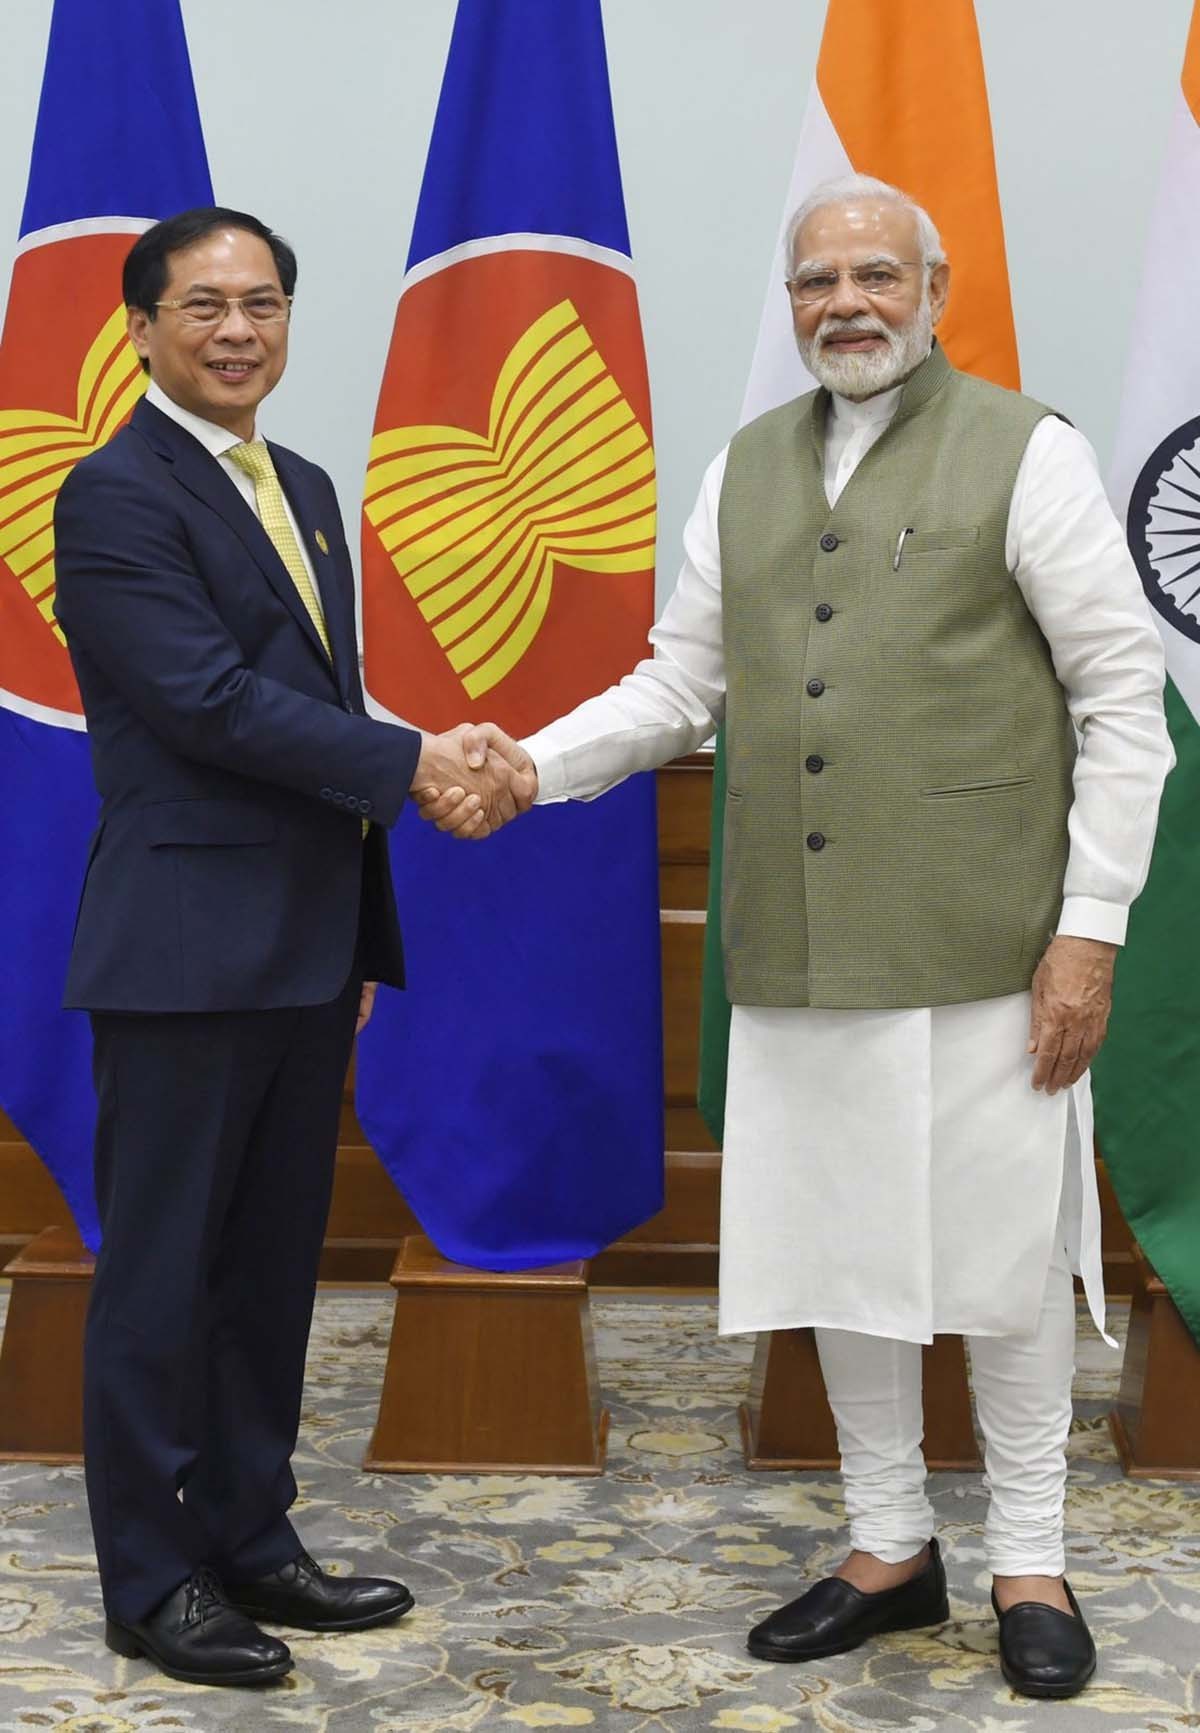 ASEAN-India strategic partnership: The development on a solid foundation